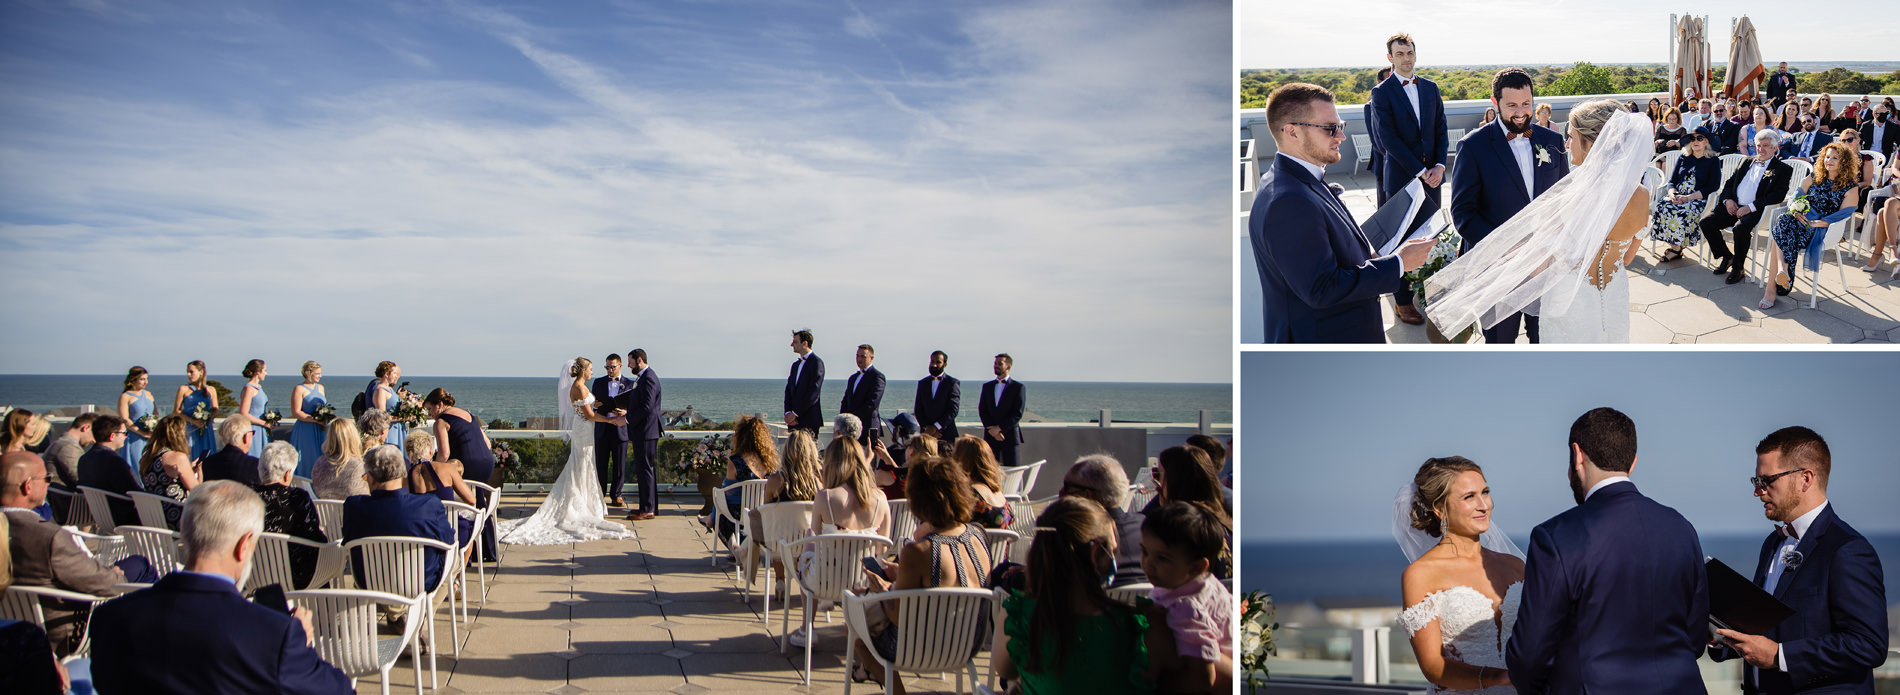 The Rooftoop Terrace Ceremony Venue at Wild Dunes Sweetgrass Inn